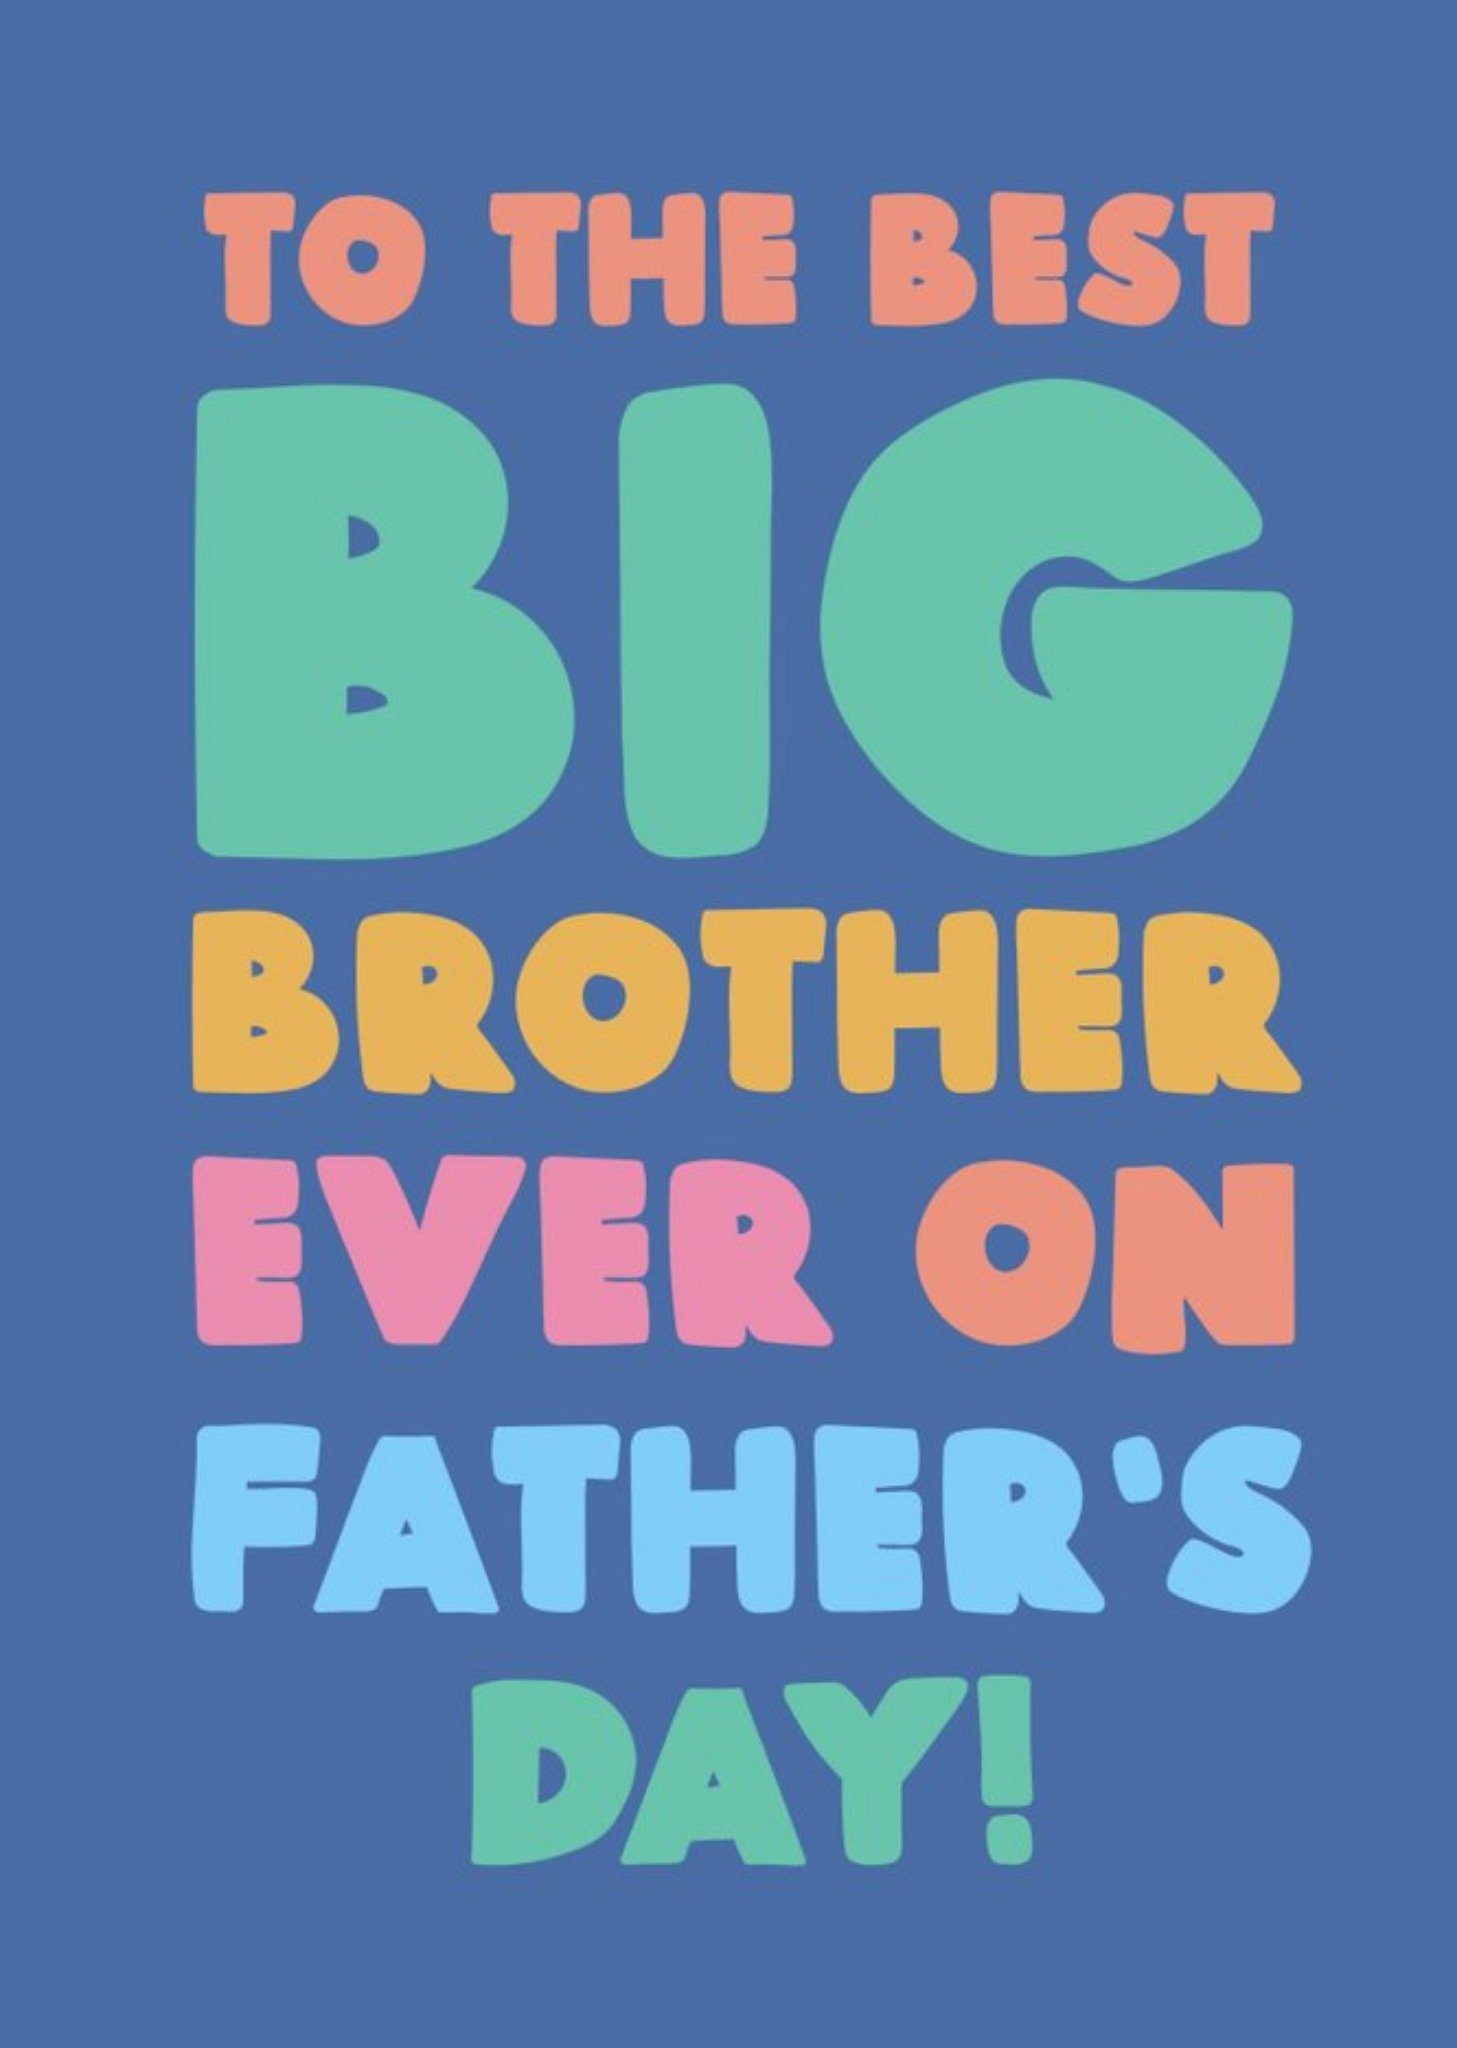 Moonpig Beyond Words To The Best Big Brother Father's Day Card Ecard